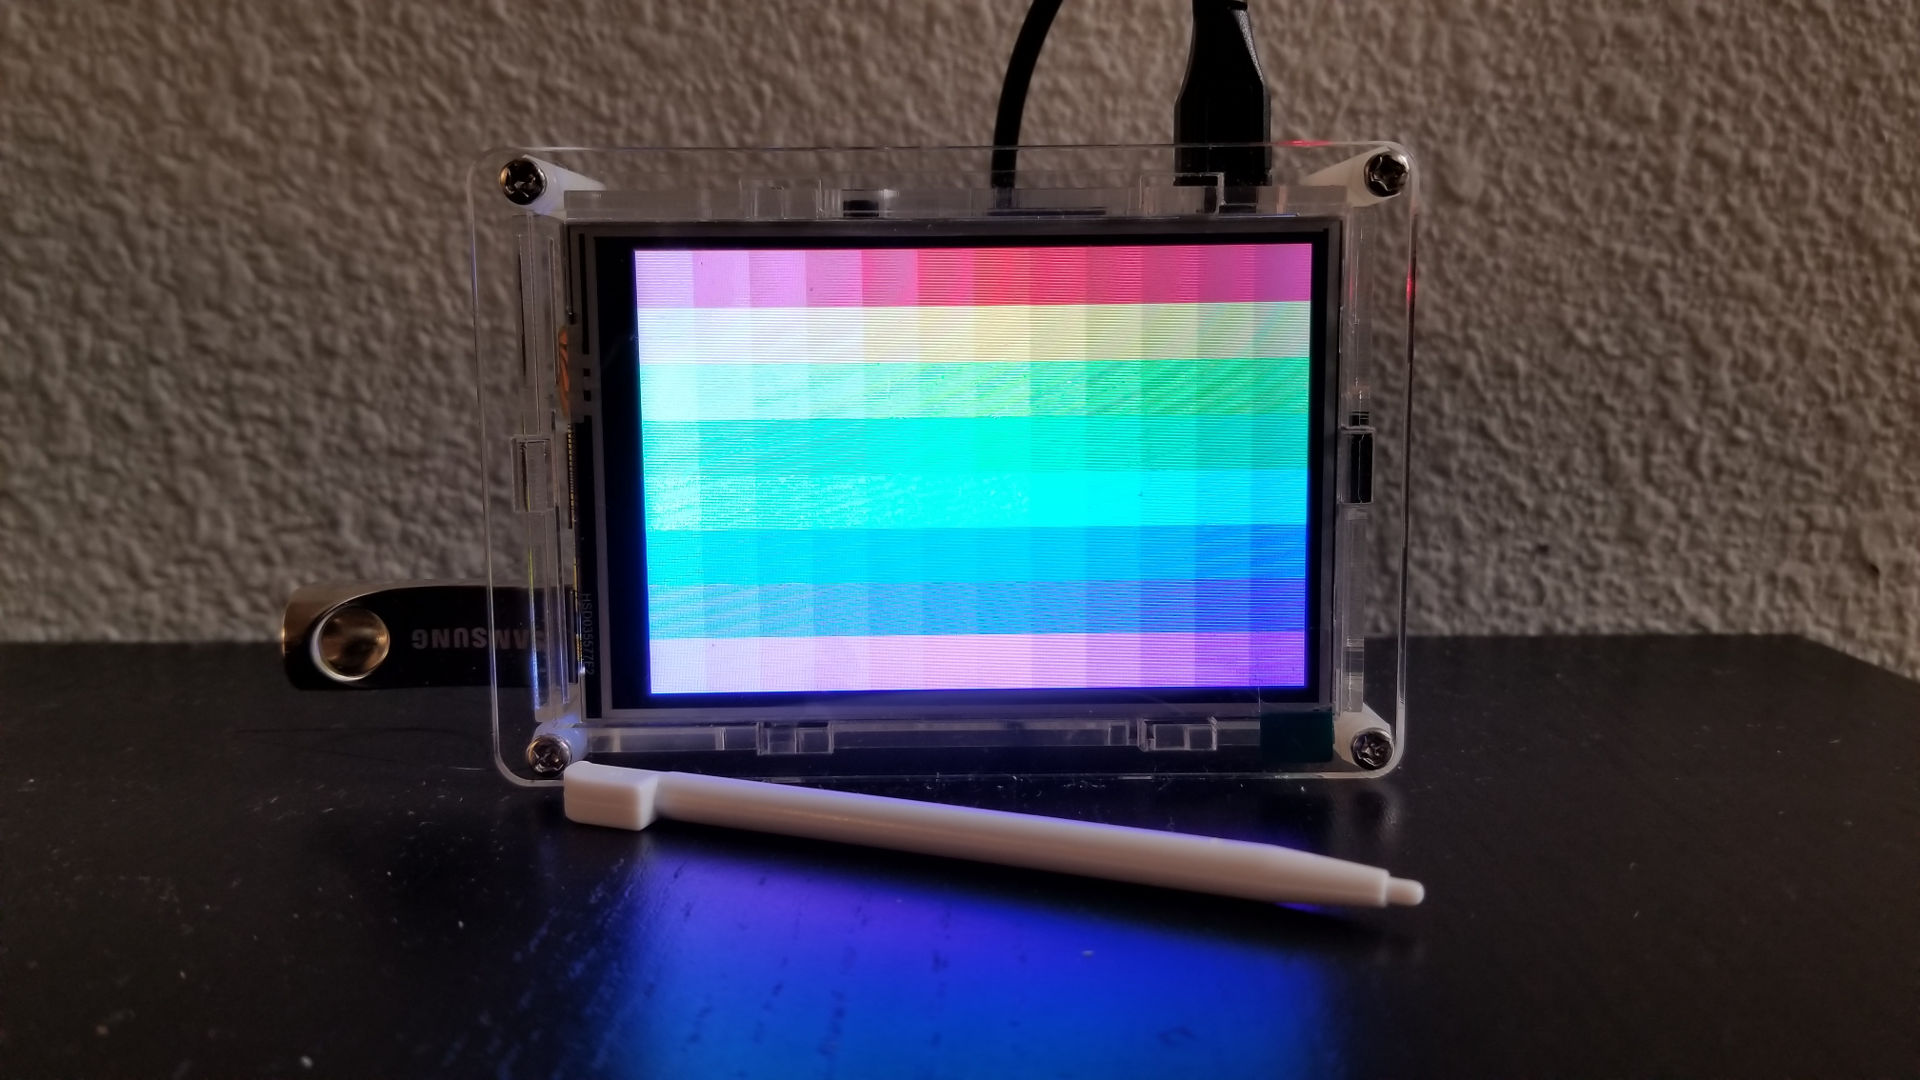 My Raspberry Pi, running an applications showing a grid of colors sorted by hue and luminance